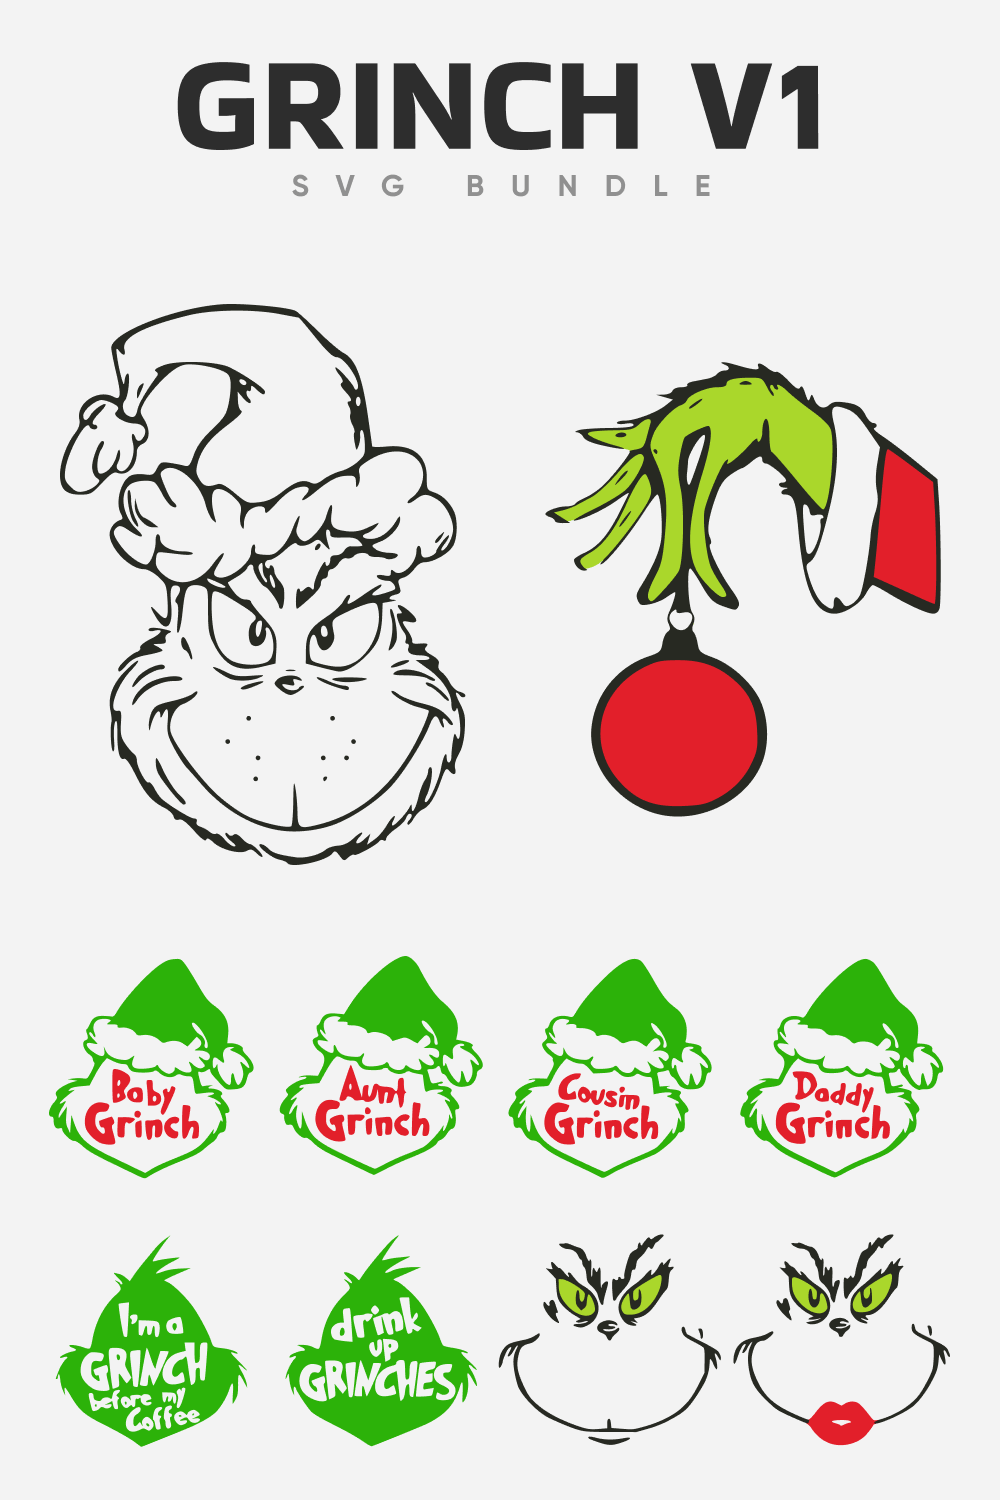 Family Grinch in Christmas hats.